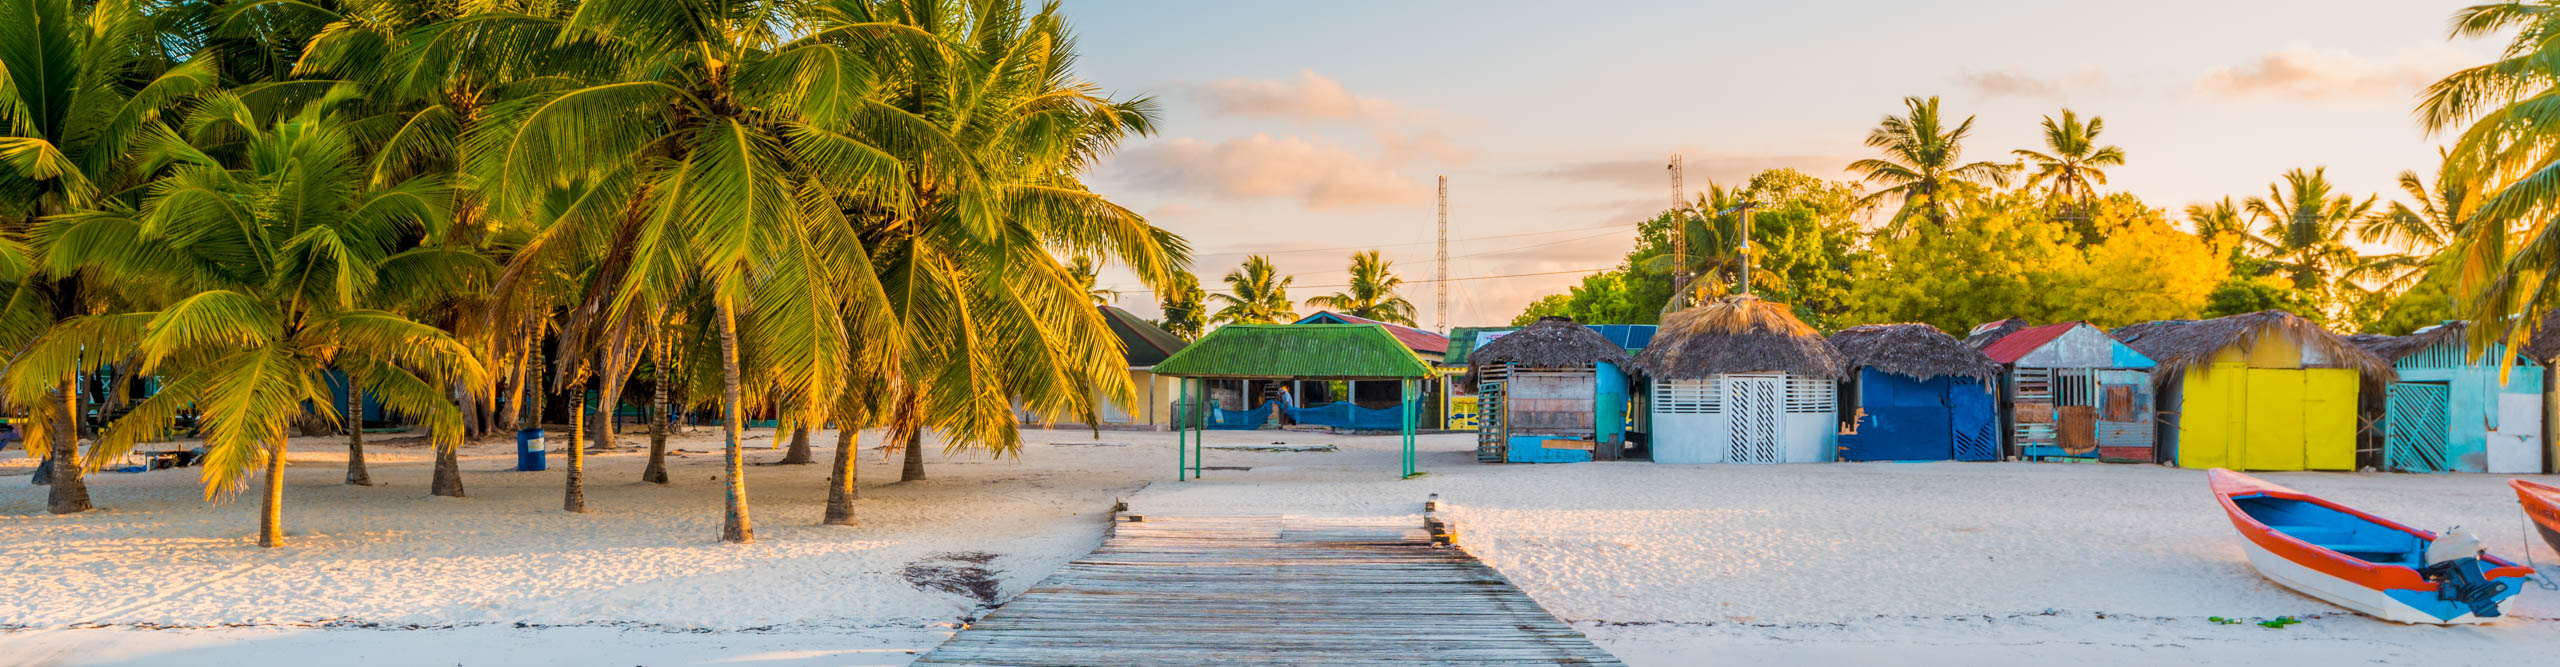 Wooden pier to a tropical beach, with colourful hits at sunset, Saona island, Dominican Republic 